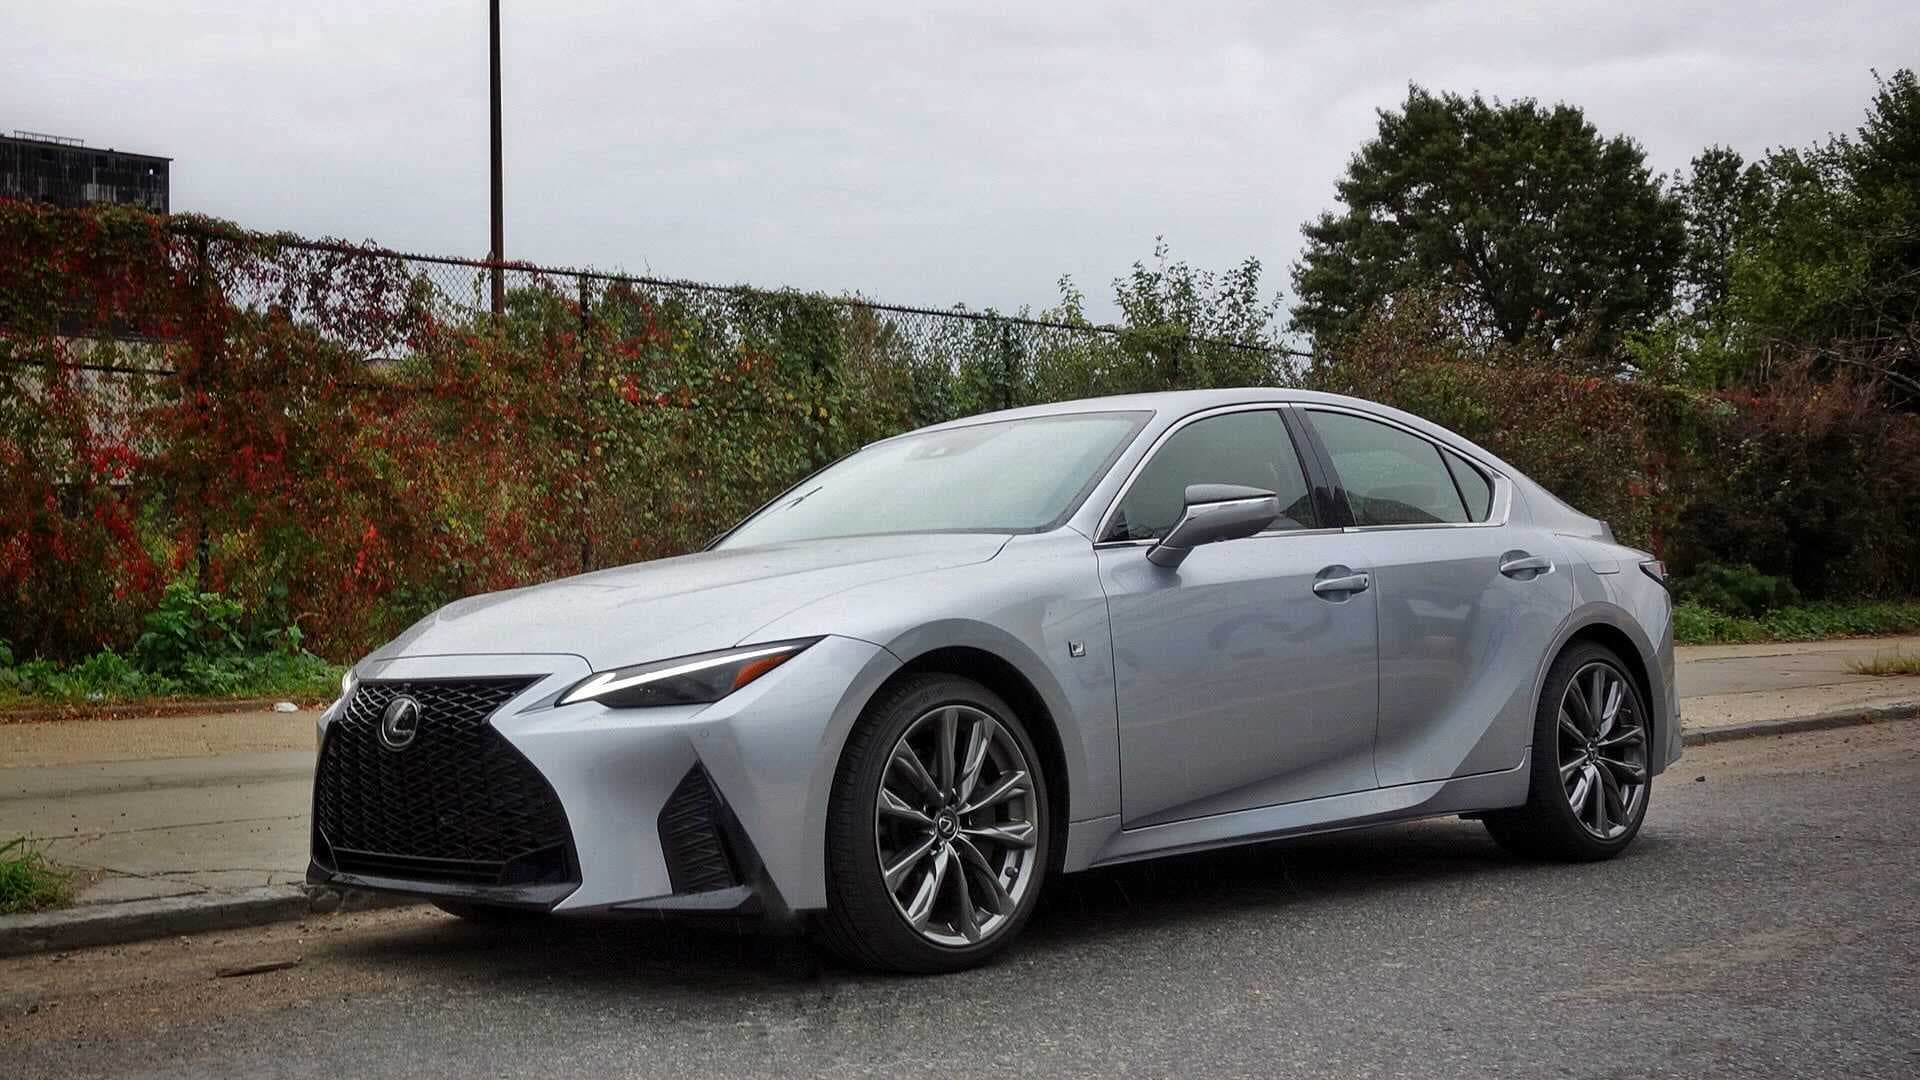 2021 Lexus IS 350 F Sport: Needed Updates Put the IS Back in the Game